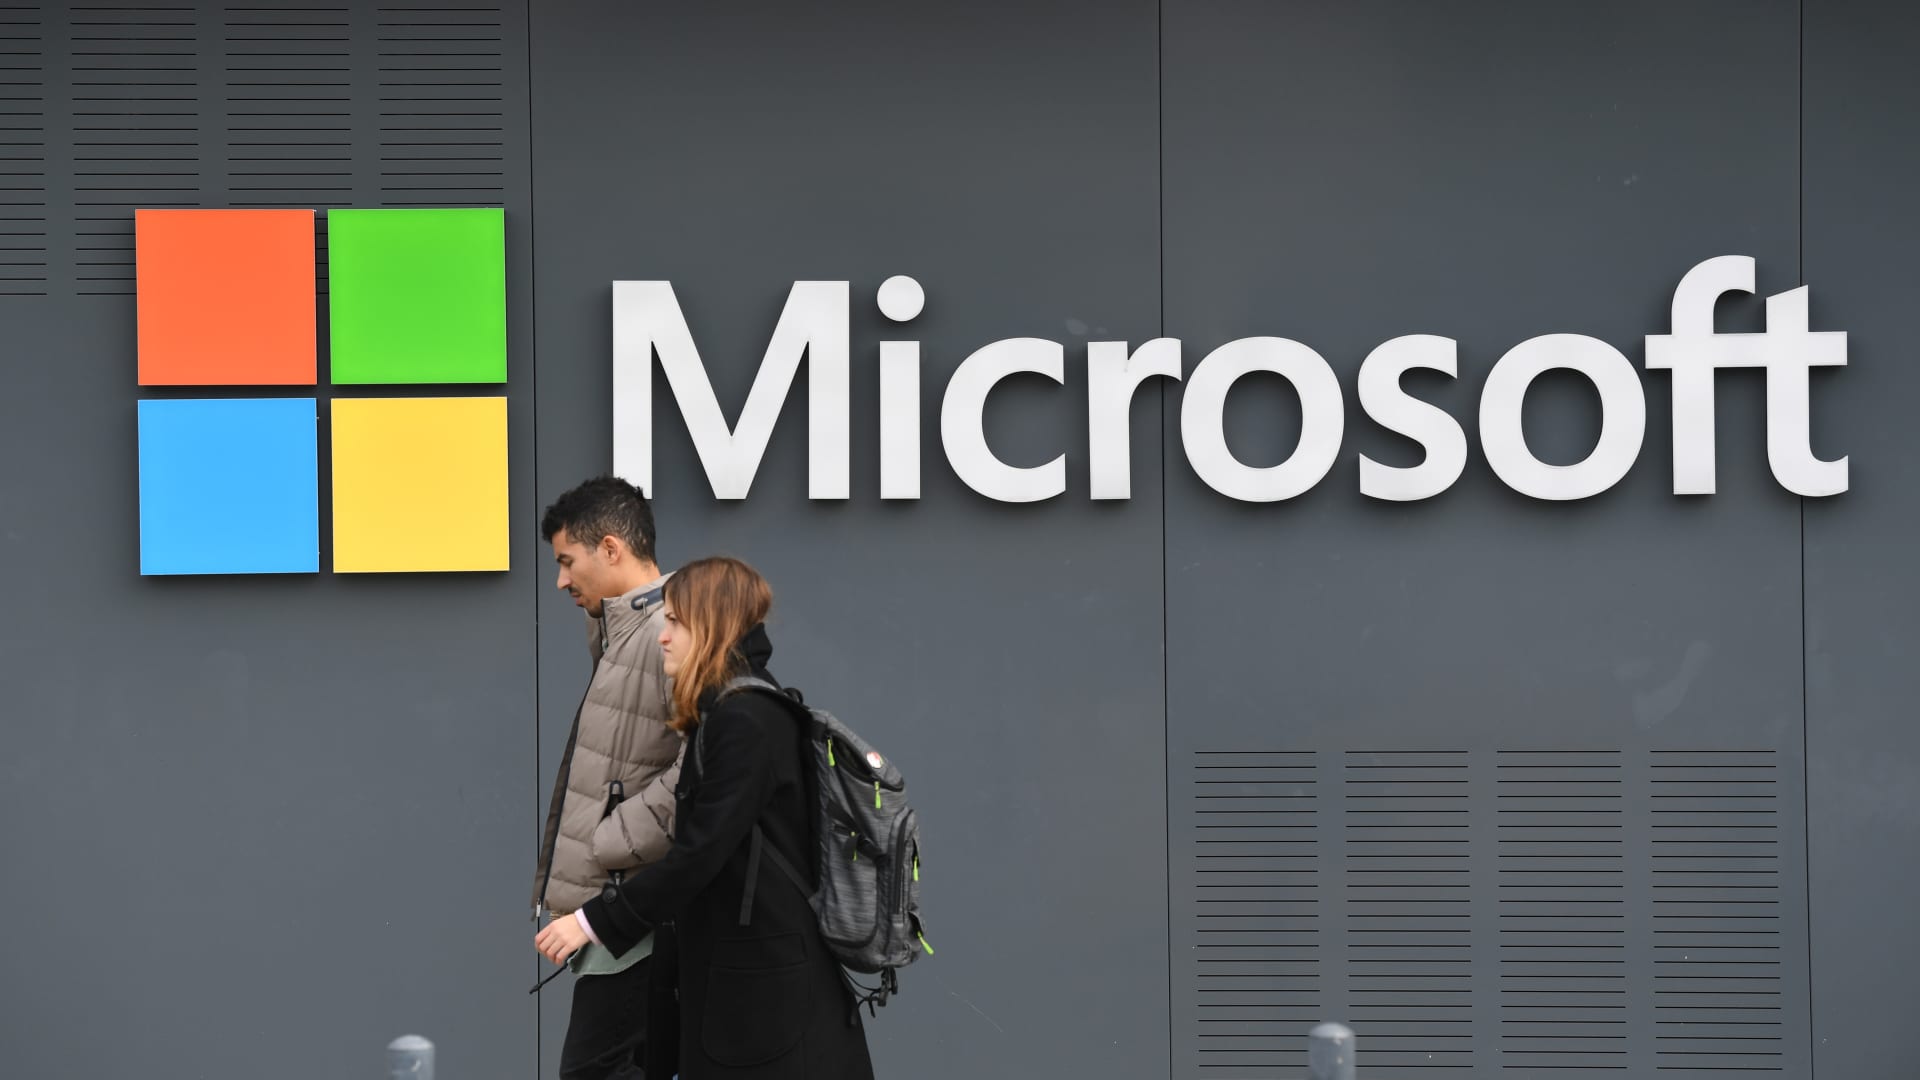 Microsoft drops after UBS analysts say company faces cloud weakness